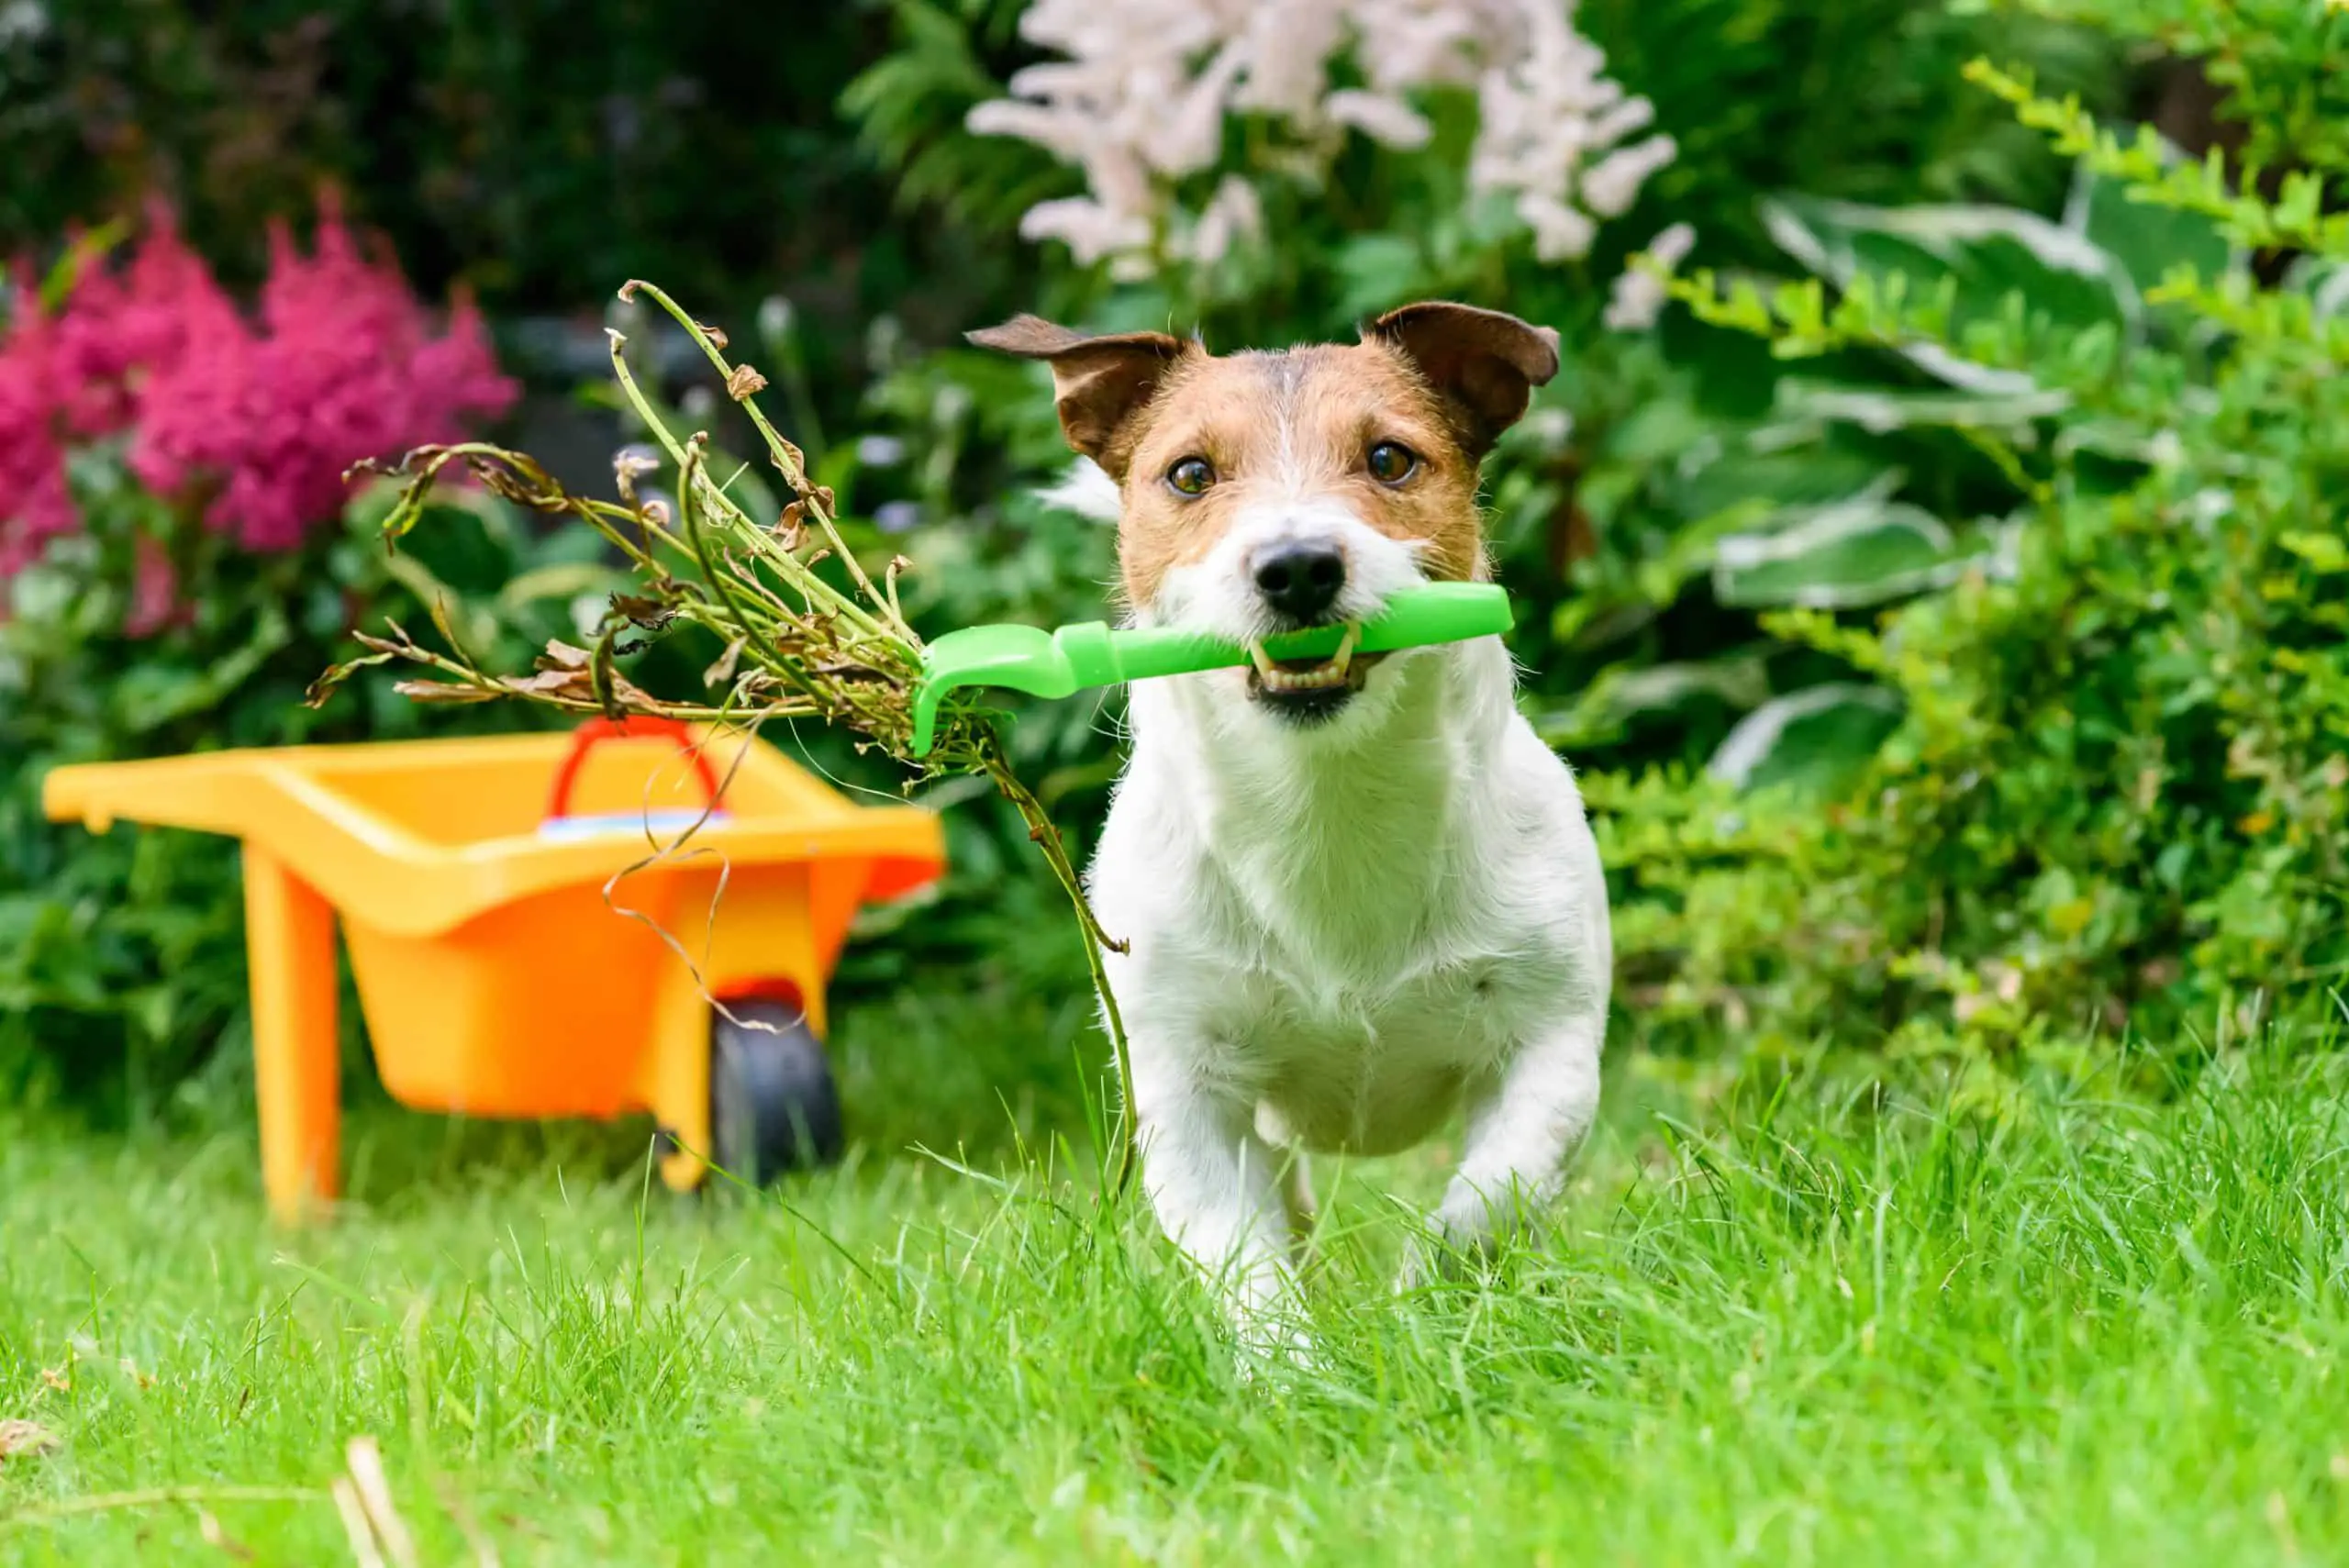 Using a weed killer in the garden around your dogs and keeping them safe